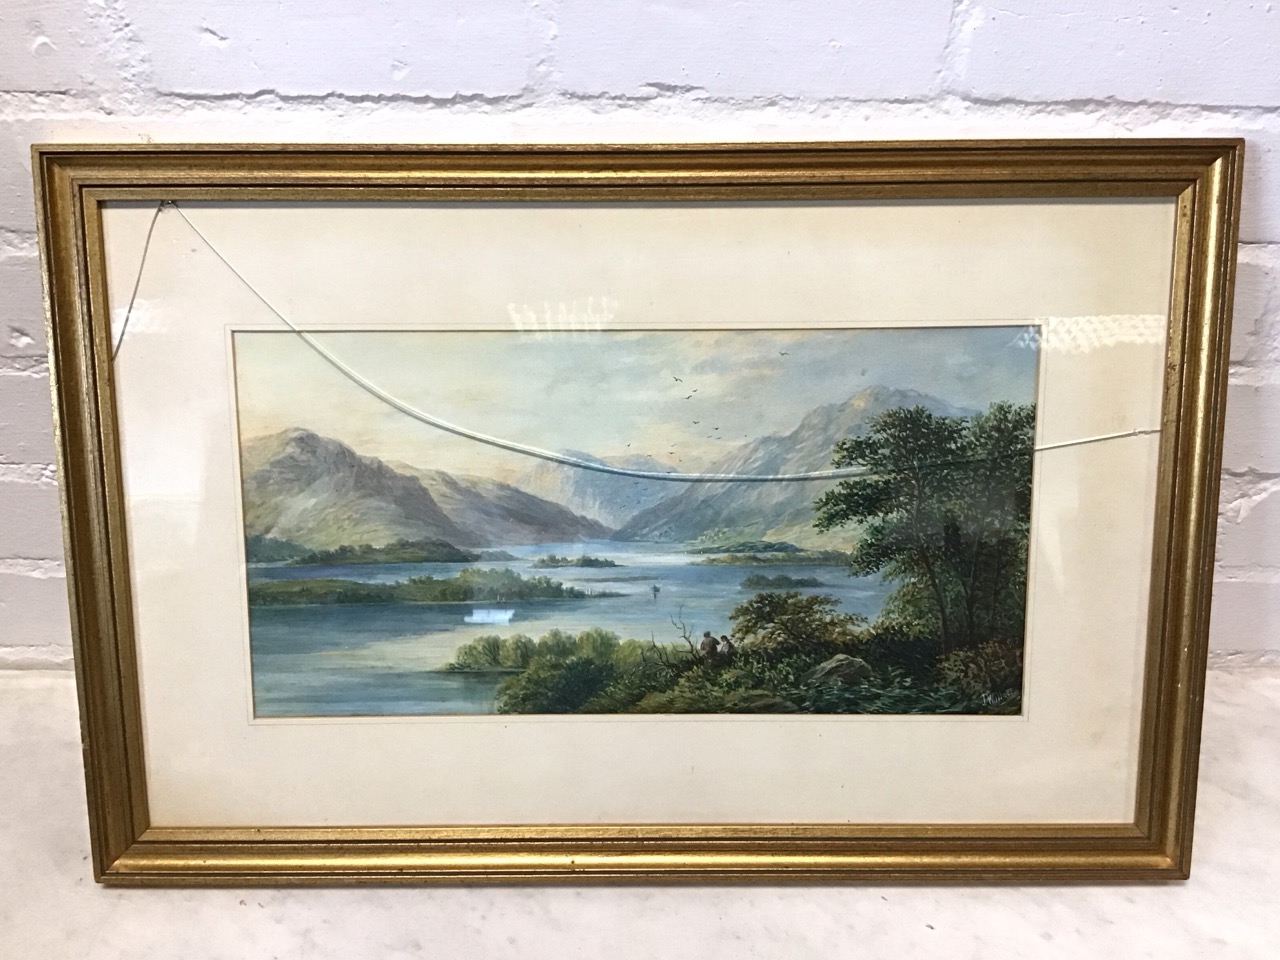 J Wallace, C19th watercolour, lake landscape with figures in foreground, signed, mounted & gilt